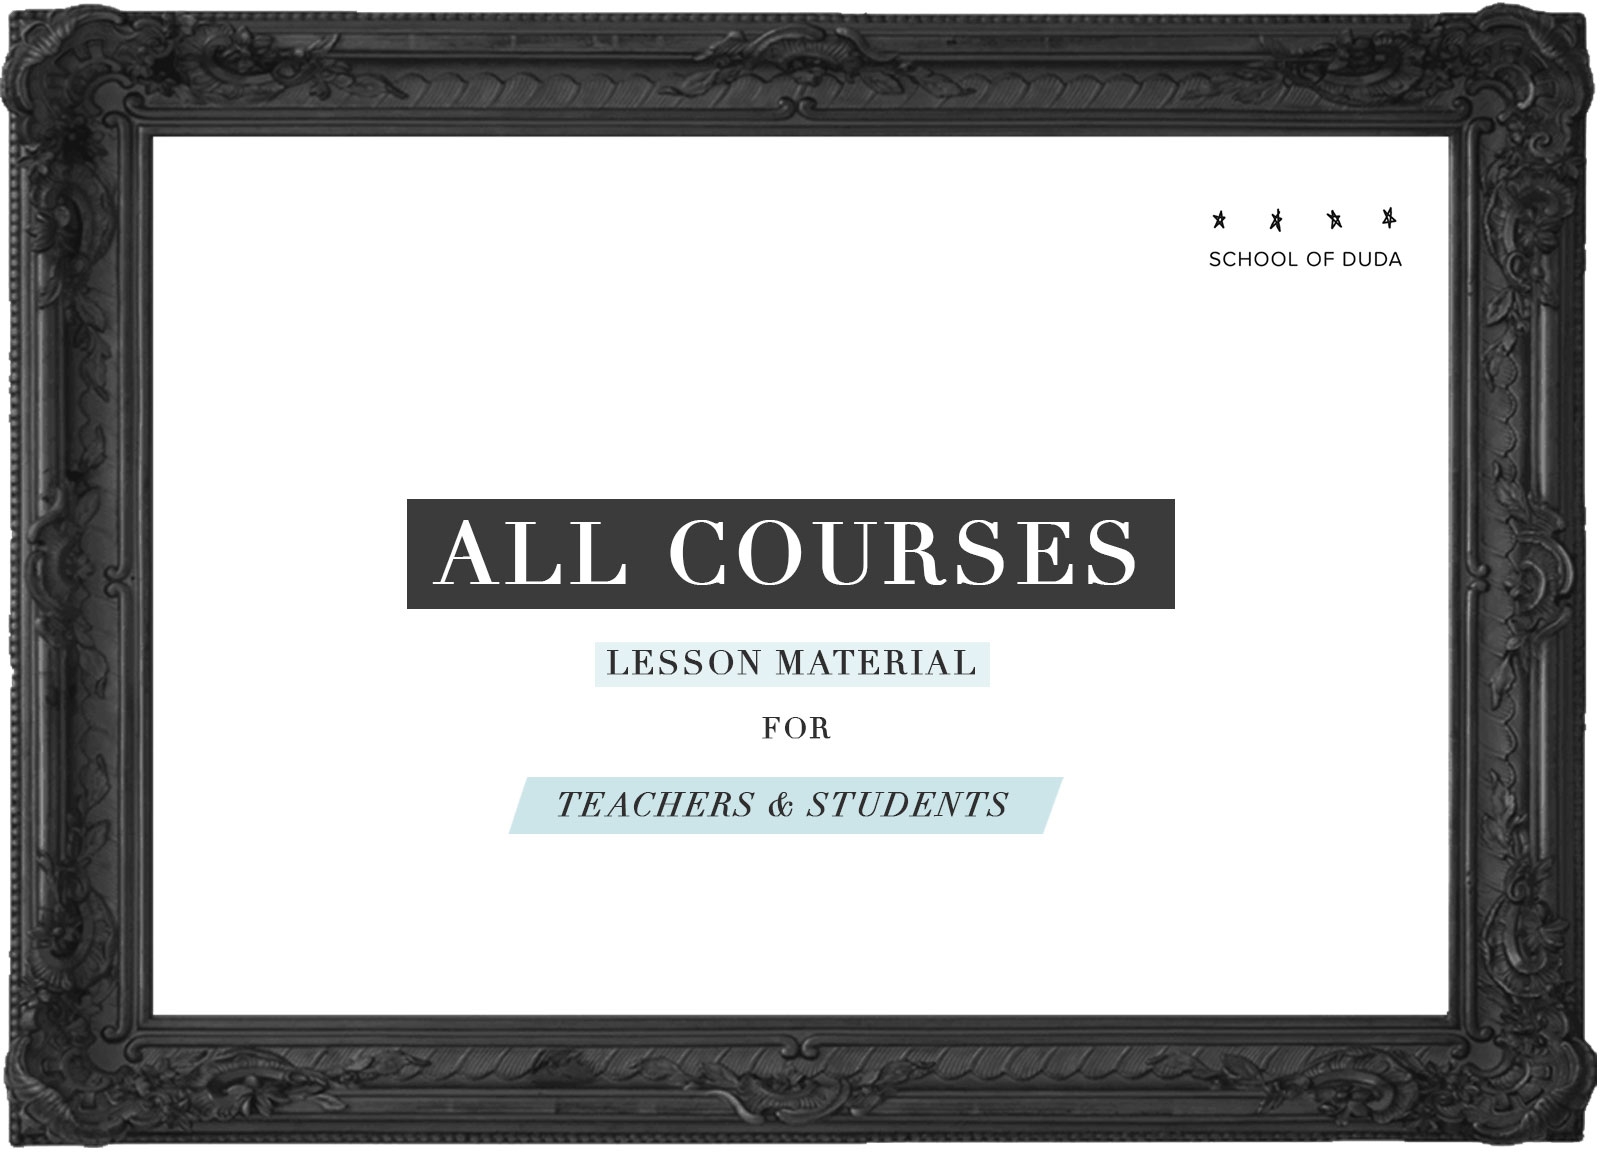 ALL COURSES : LESSON MATERIAL